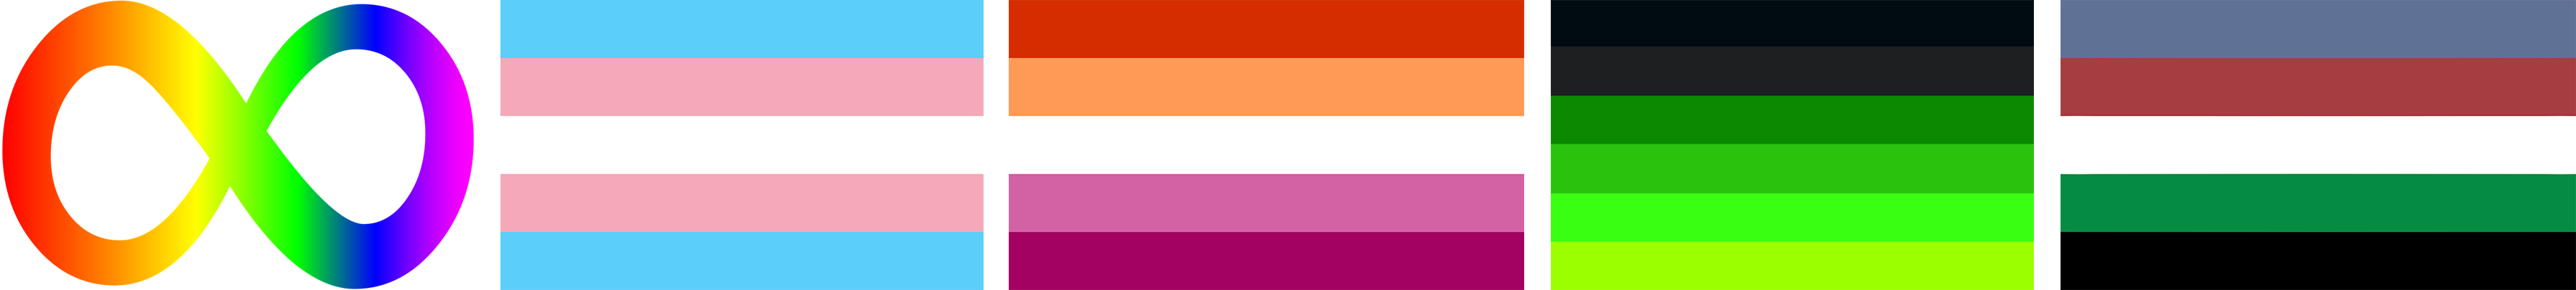 A horizontal banner featuring flags and symbols reflecting that of the webmaster. These include the rainbow infinity symbol, used to represent autism, the transgender pride flag designed by Monica Helms in 1999, the five-stripe lesbian pride flag derived from the 2018 seven-stripe design by Emily Gwen, the techgender xenogender flag design made by gender-plaza on Tumblr in October of 2020 and the alertgender xenogender flag, designed by the webmaster.